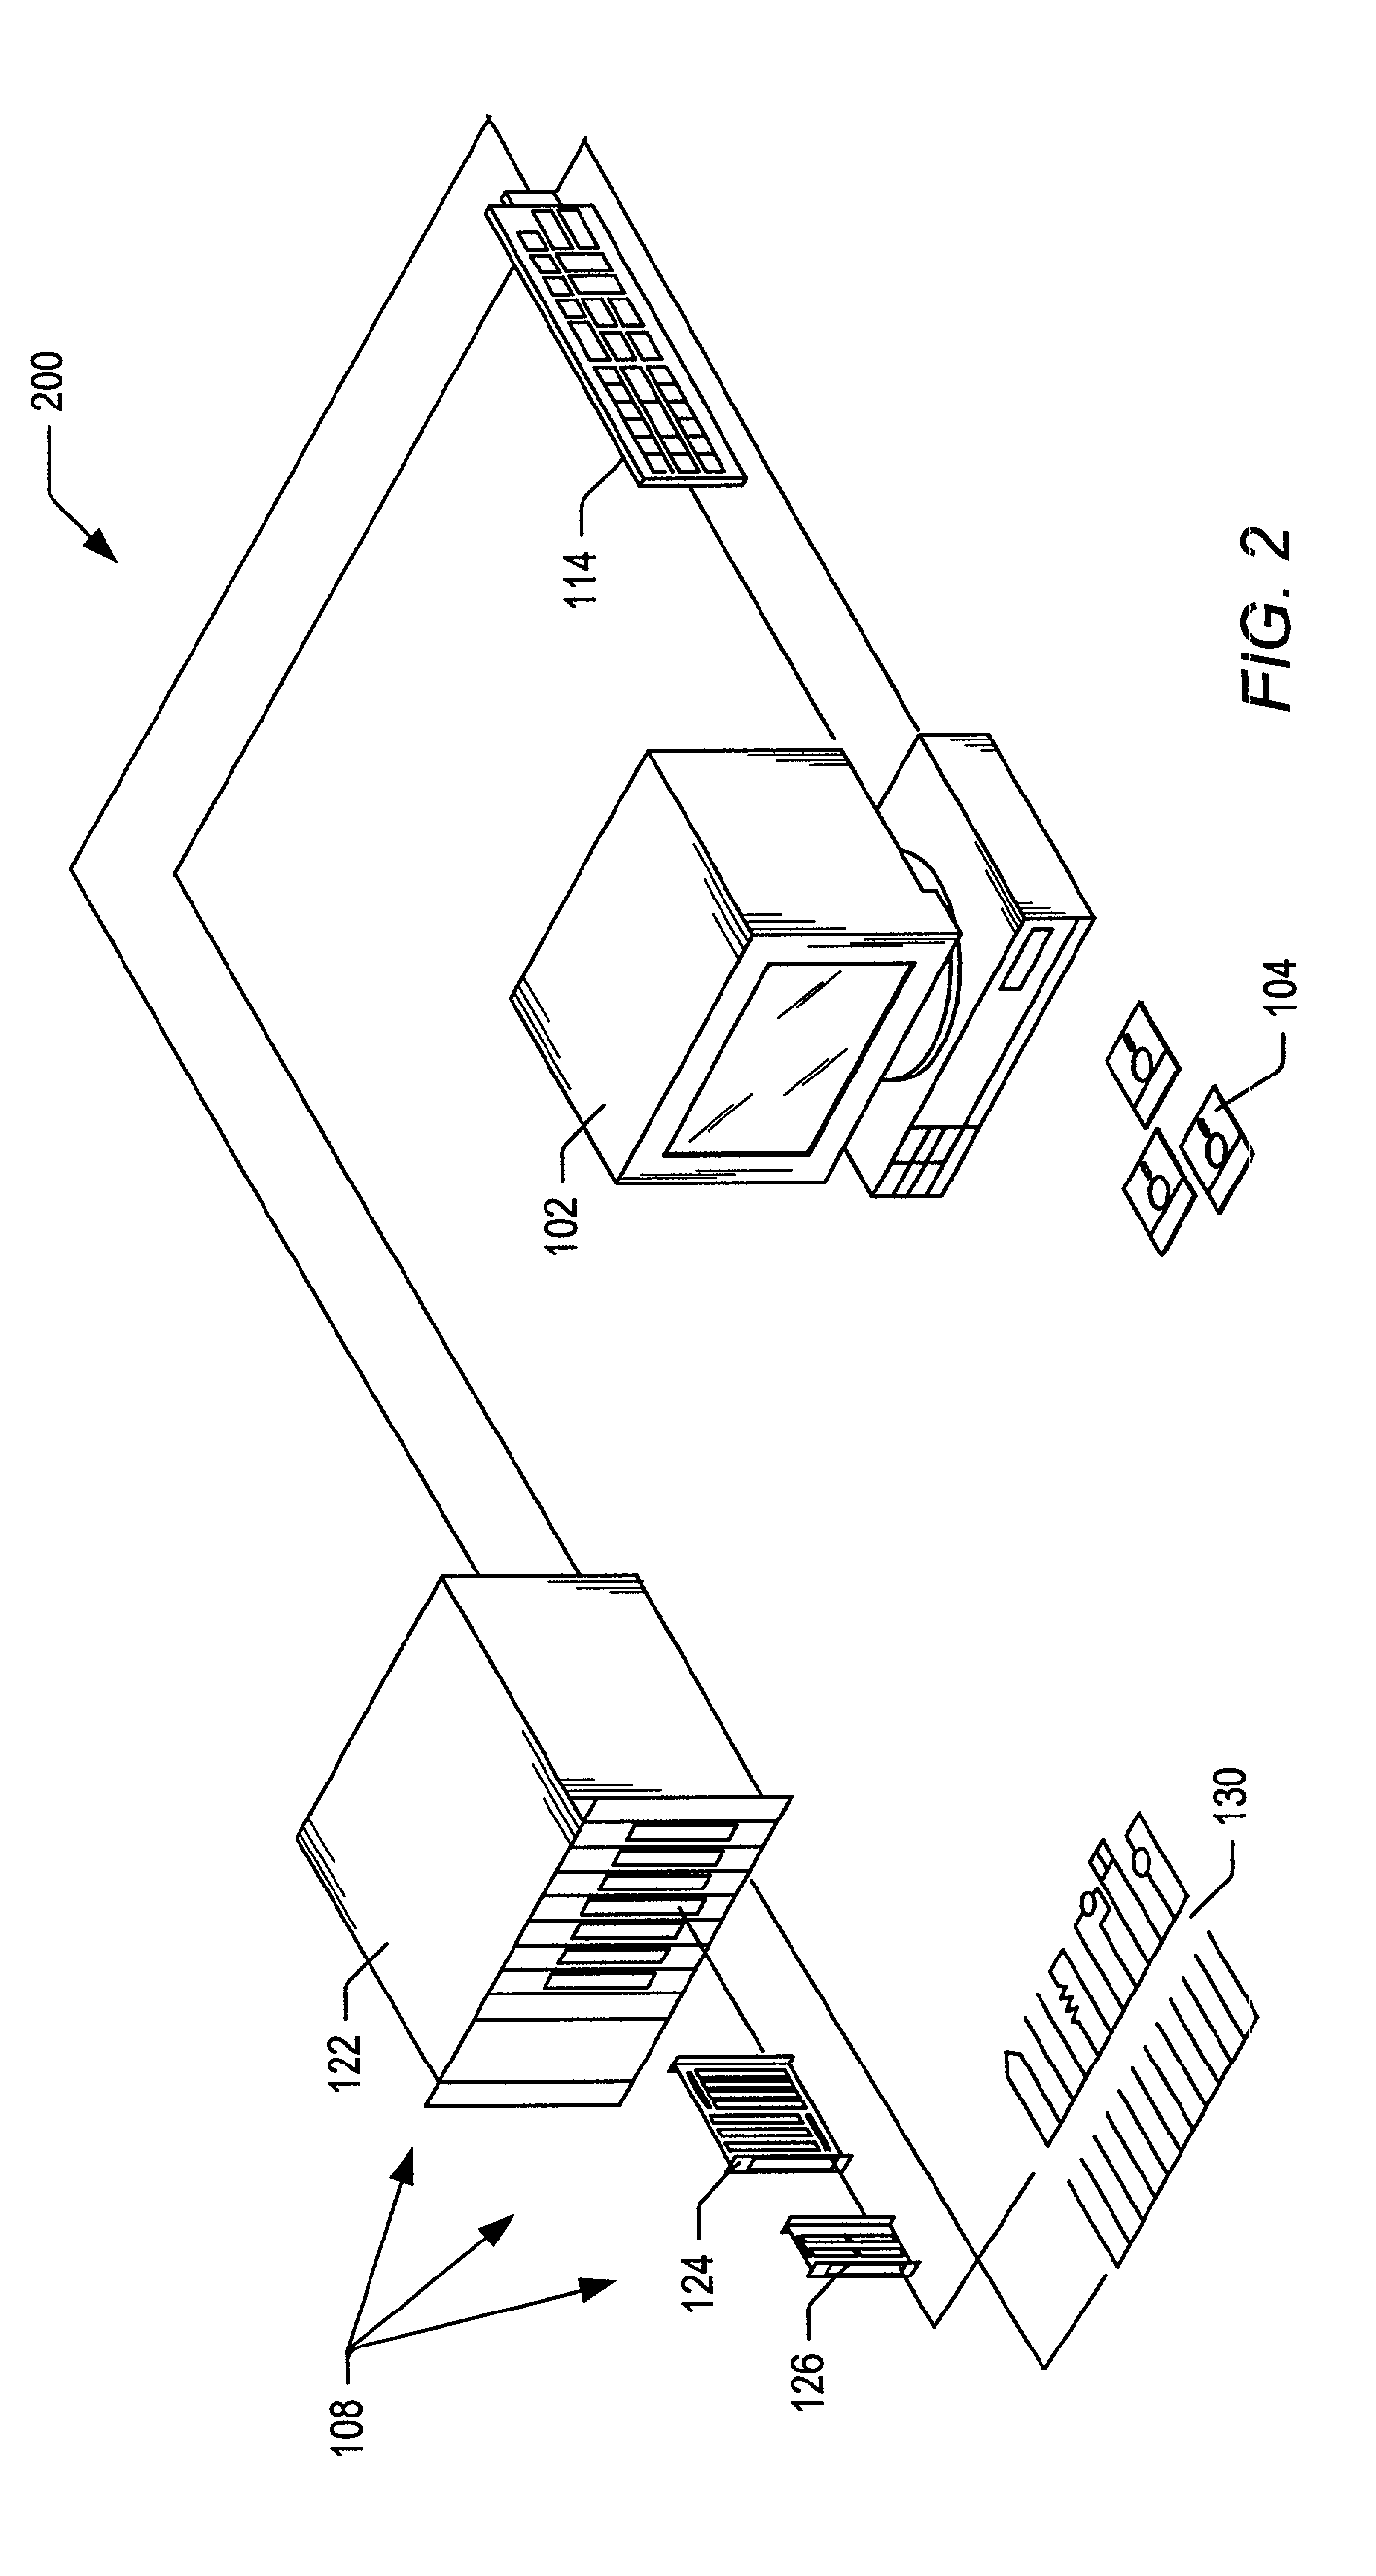 Instrumentation system having a reconfigurable instrumentation card with programmable logic and a modular daughter card